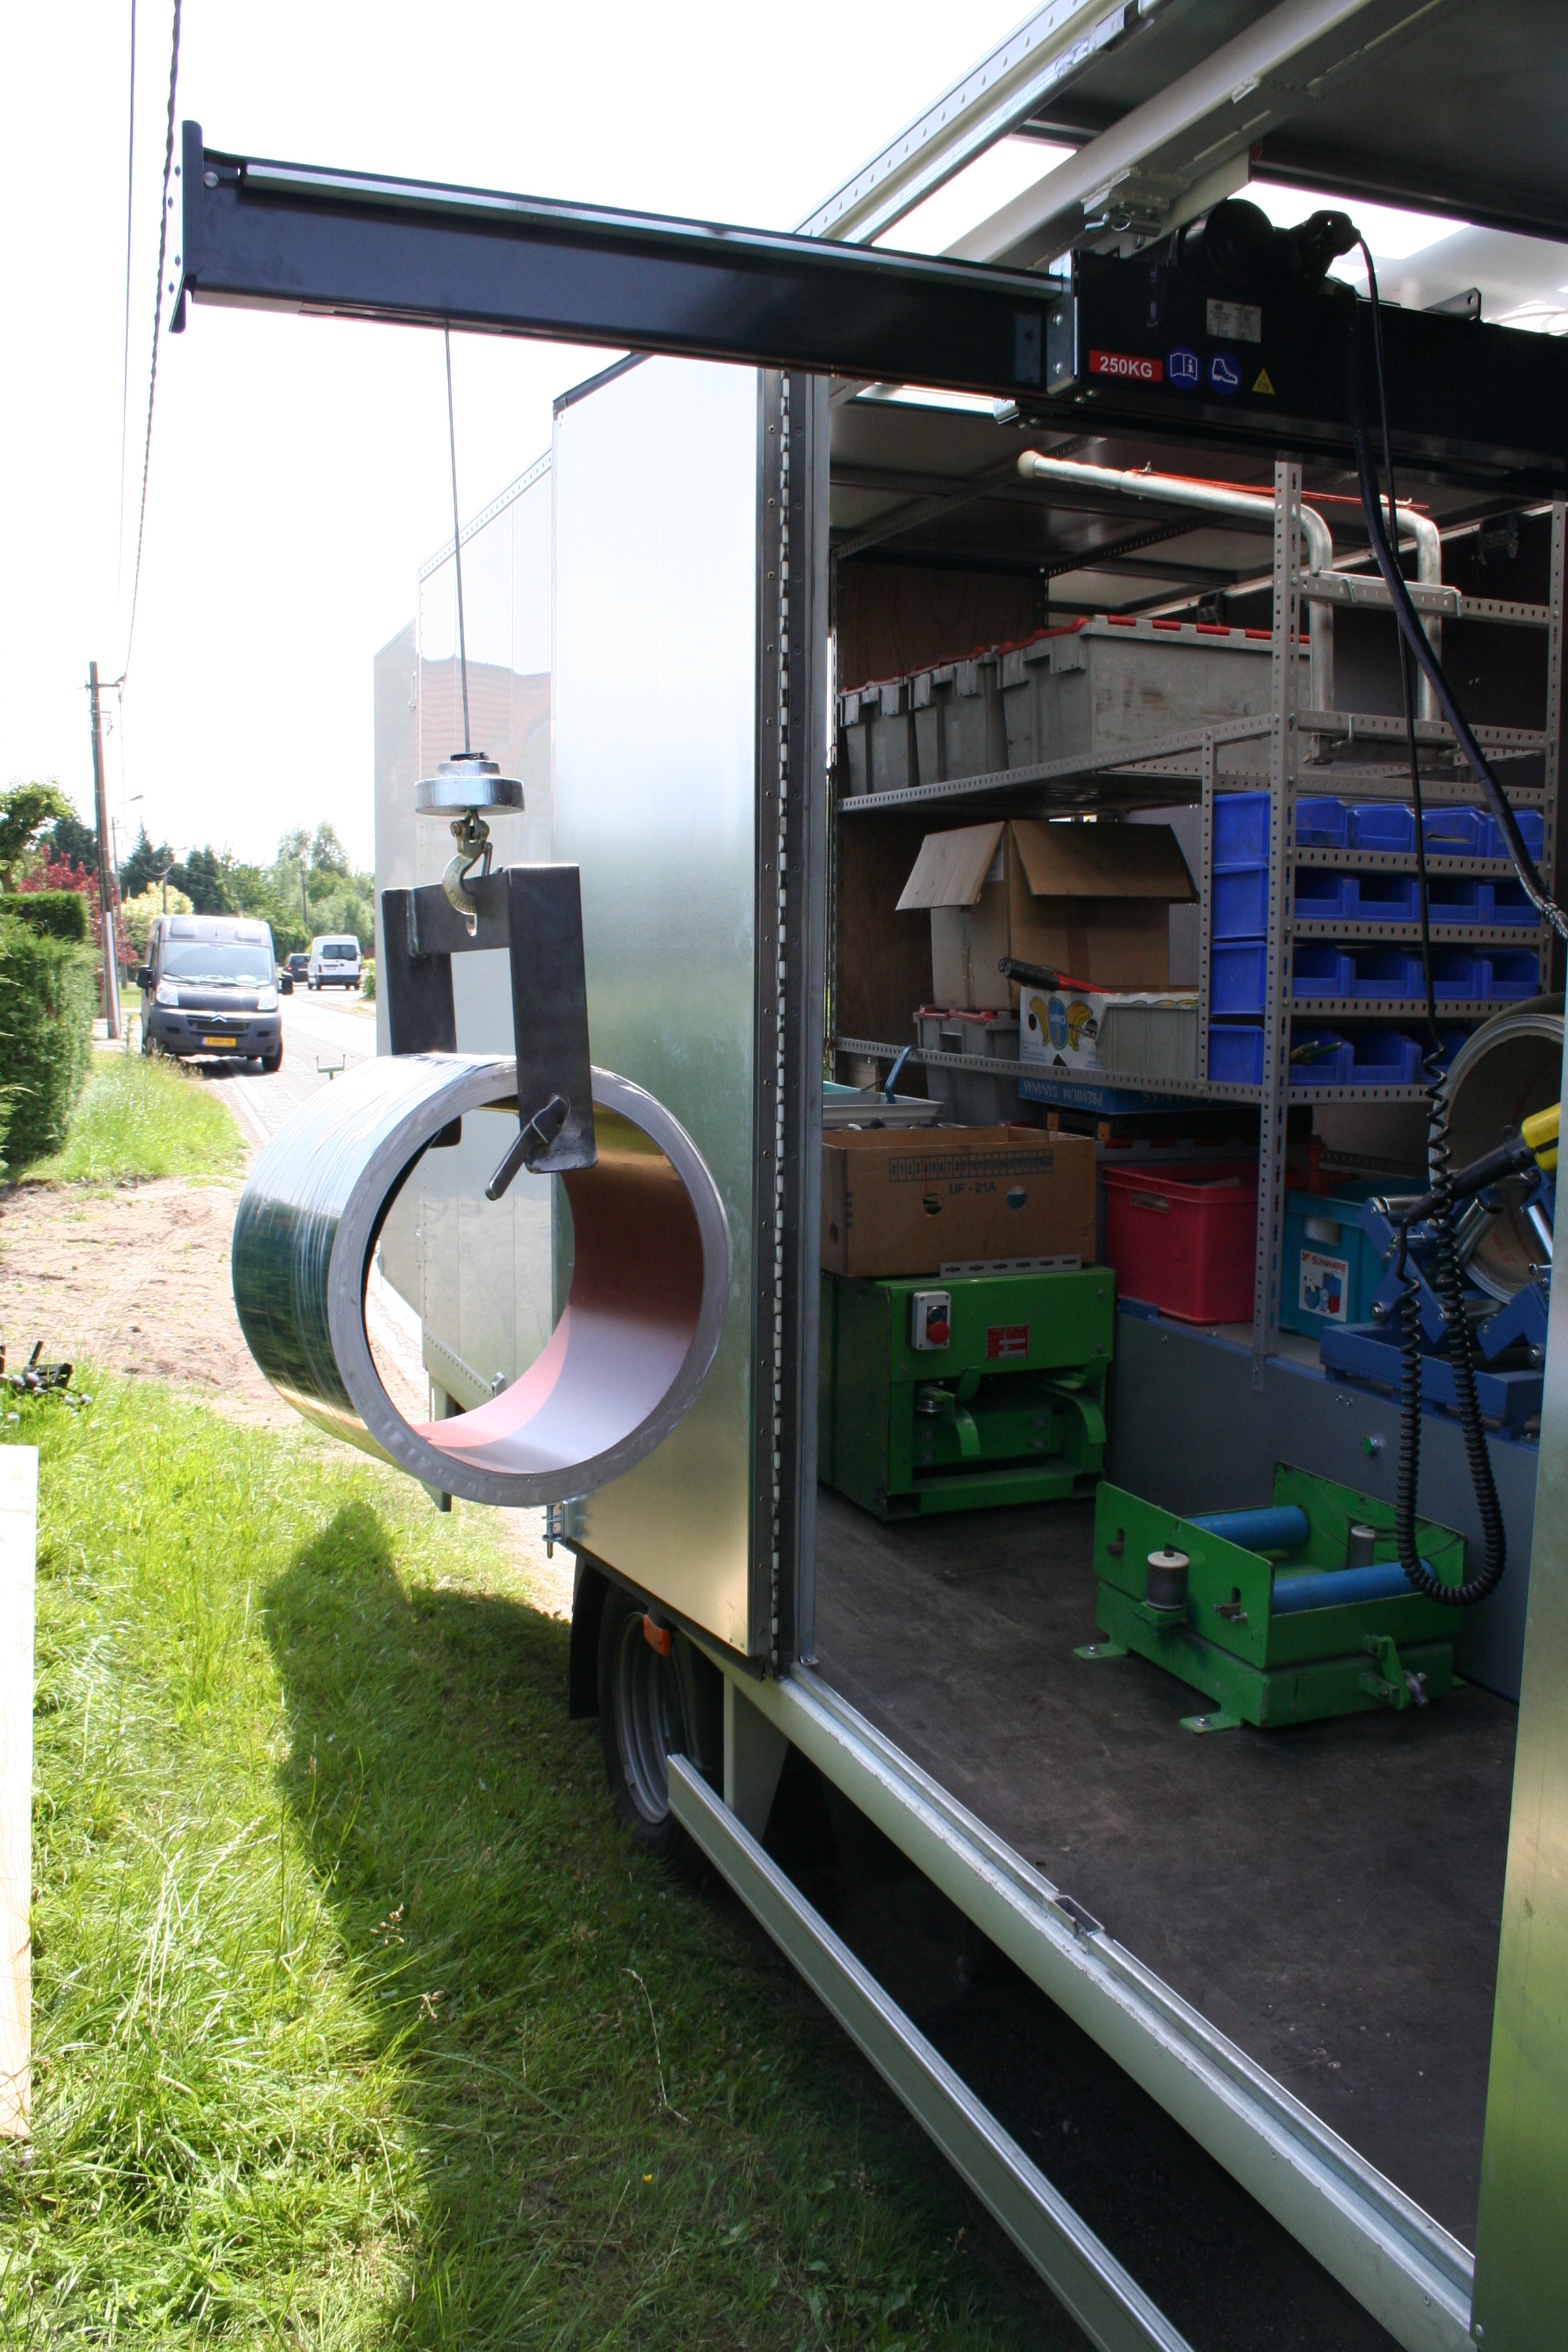 MAD EasyLoad Crane for lifting, handling and loading coils into van or lorry